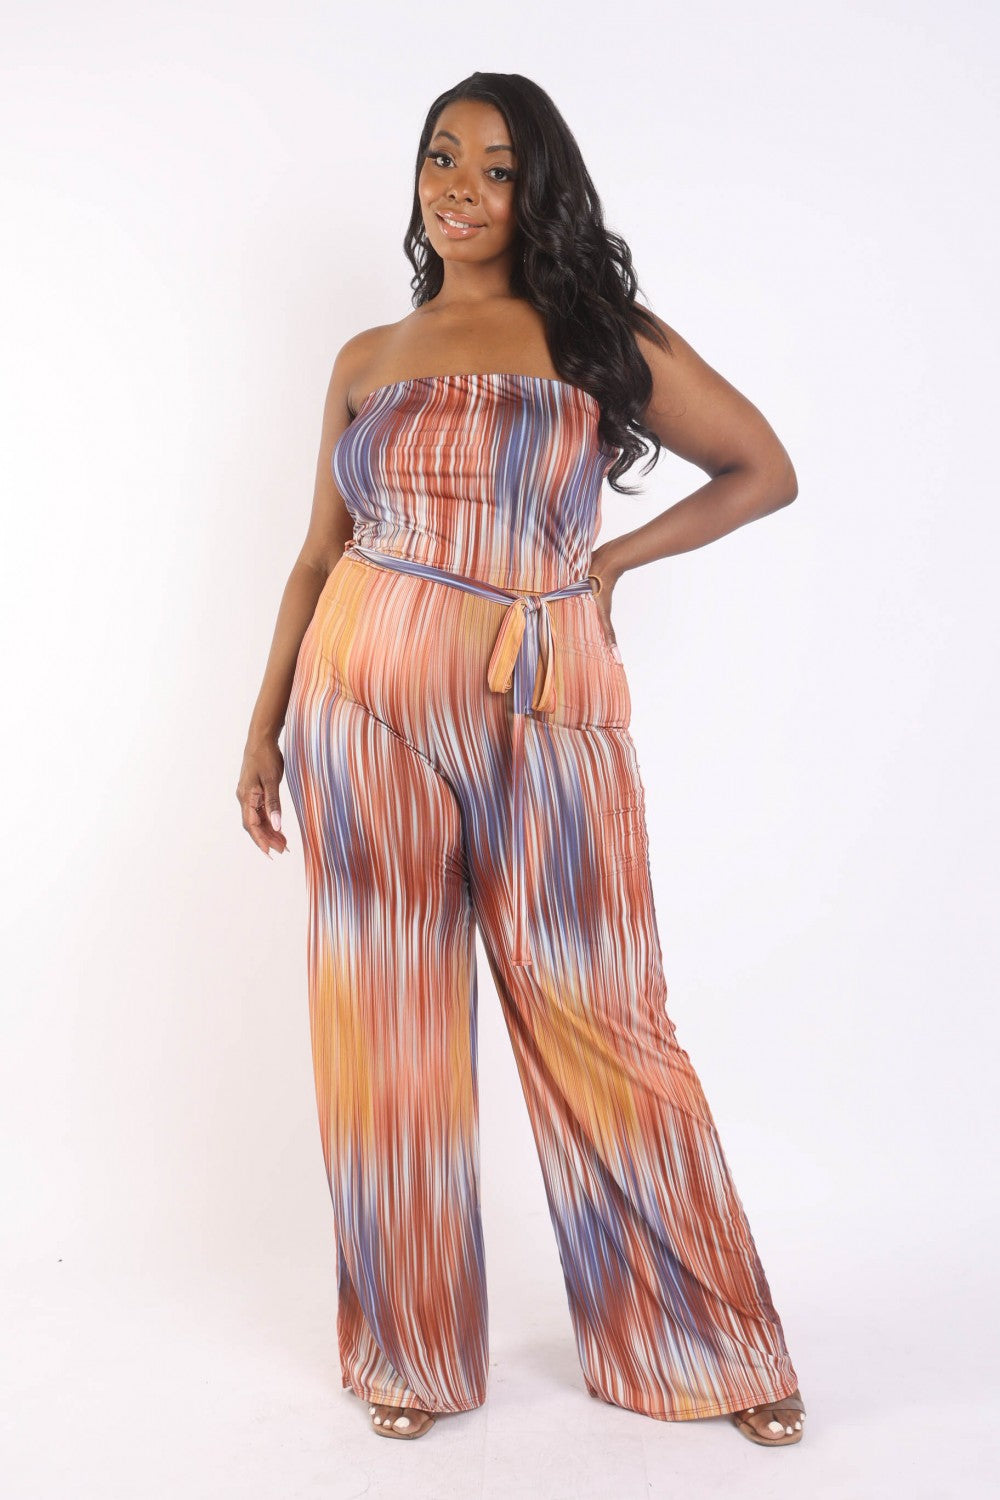 KTOO USA Brunch With Bestie Tube Top Jumpsuit Jumpsuits & Rompers RYSE Clothing Co. Orange 1XL 